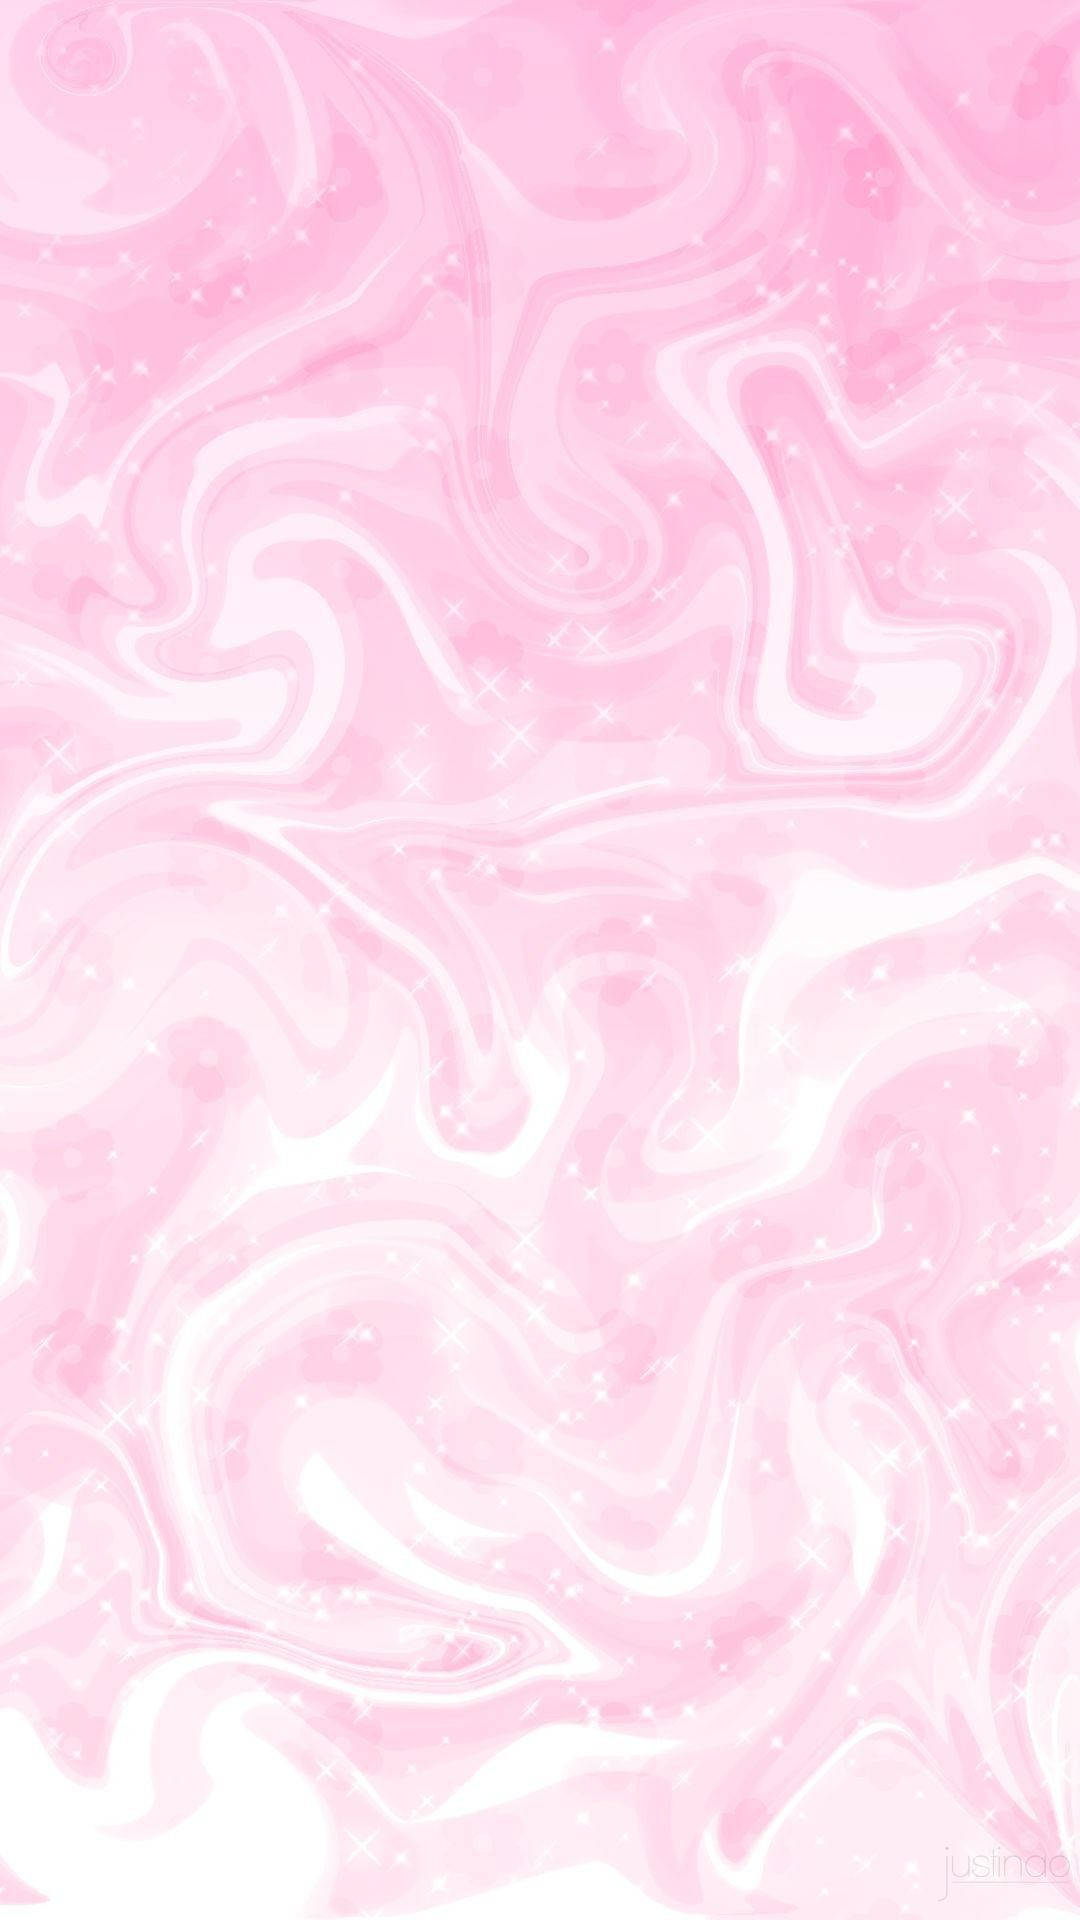 Luxurious Pink Marble Texture with Wavy Patterns Wallpaper